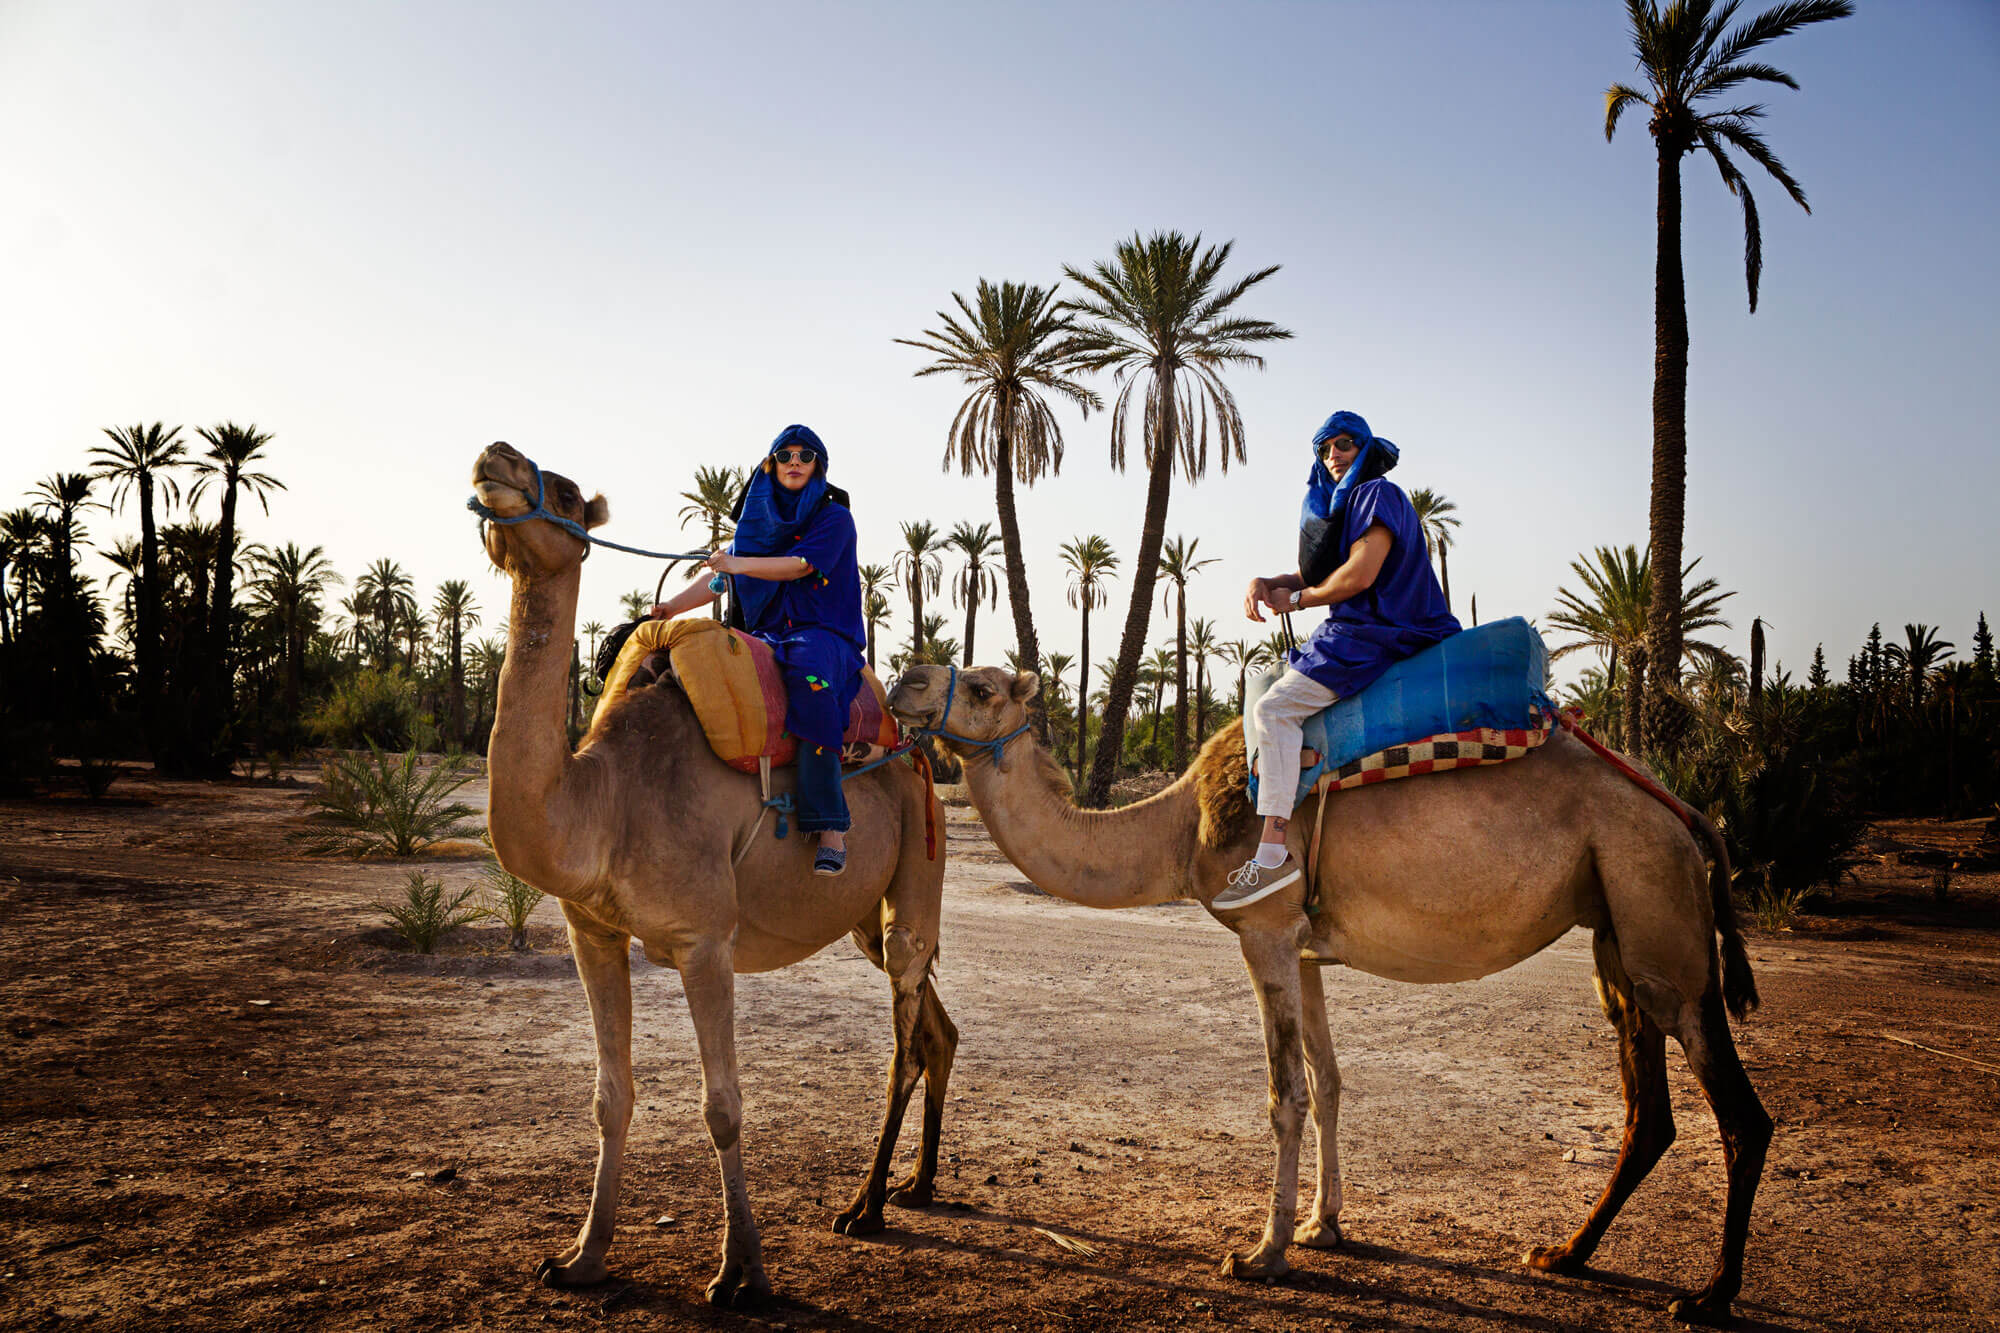 Desert and Palm Grove Camel Rides are some of the best experiences for families travelling to Morocco